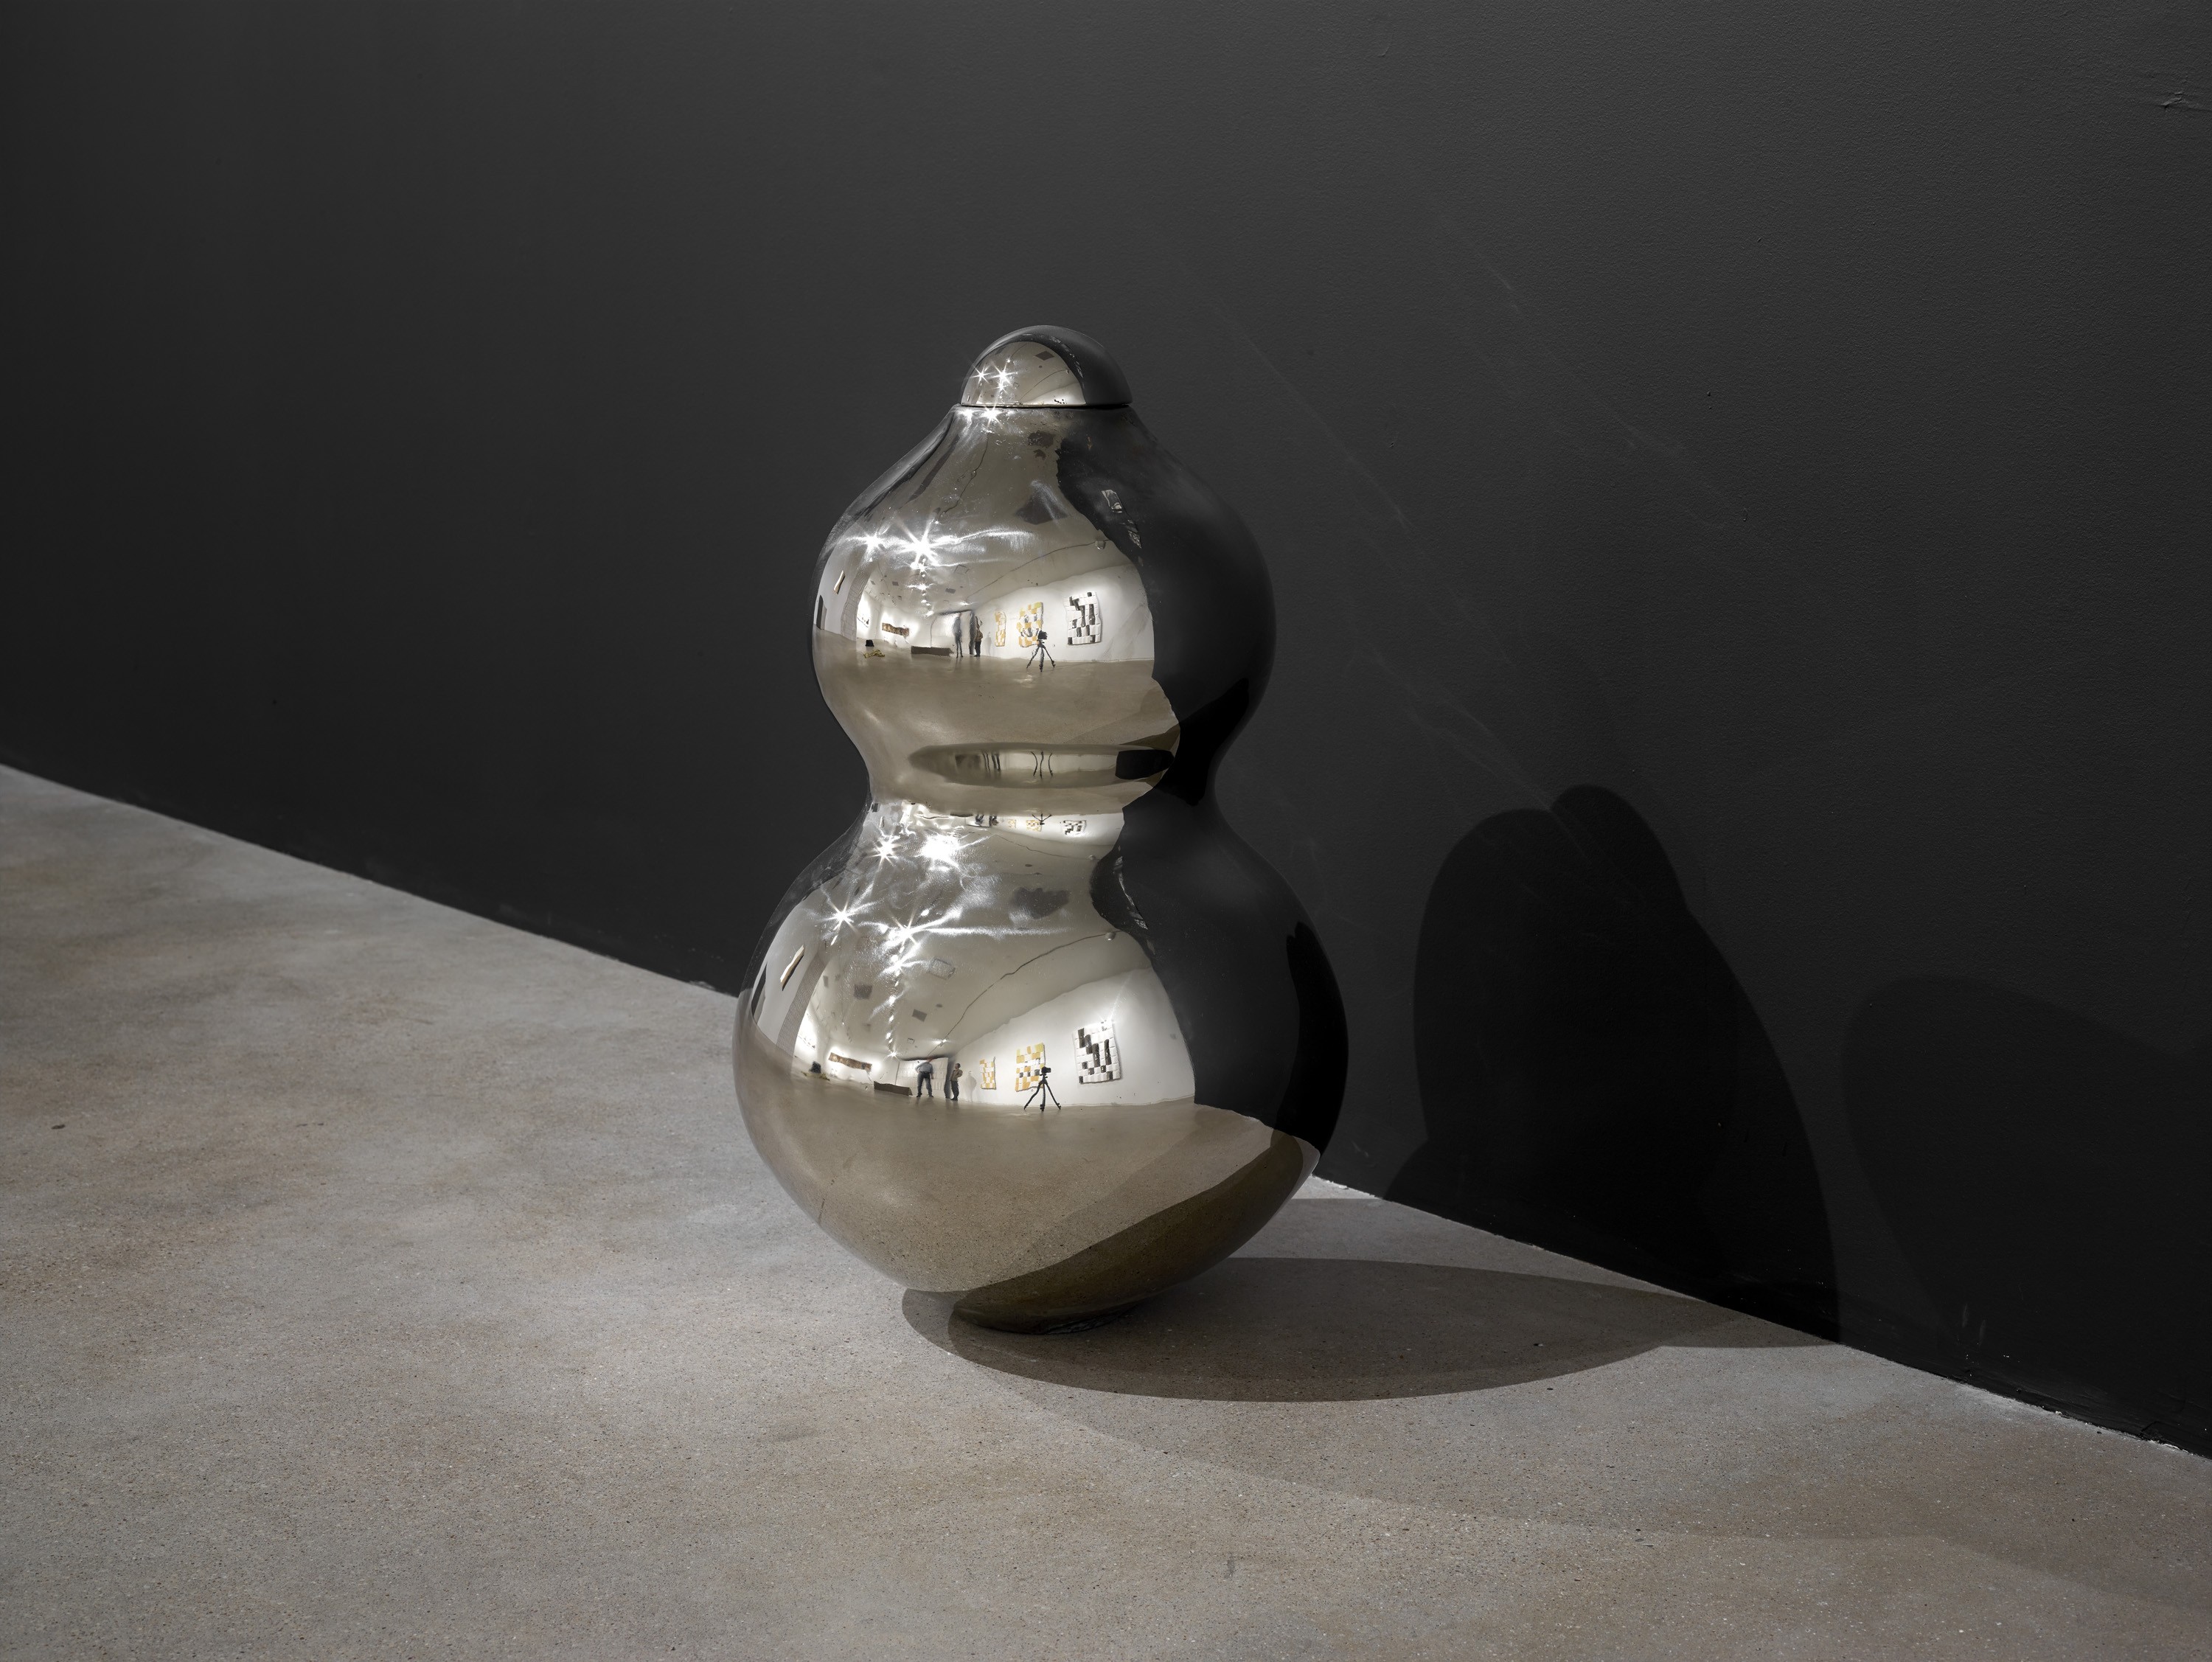 'Whirling Vase: mirror', 2013 Nickel plated plaster. Size: 24 x 16 in